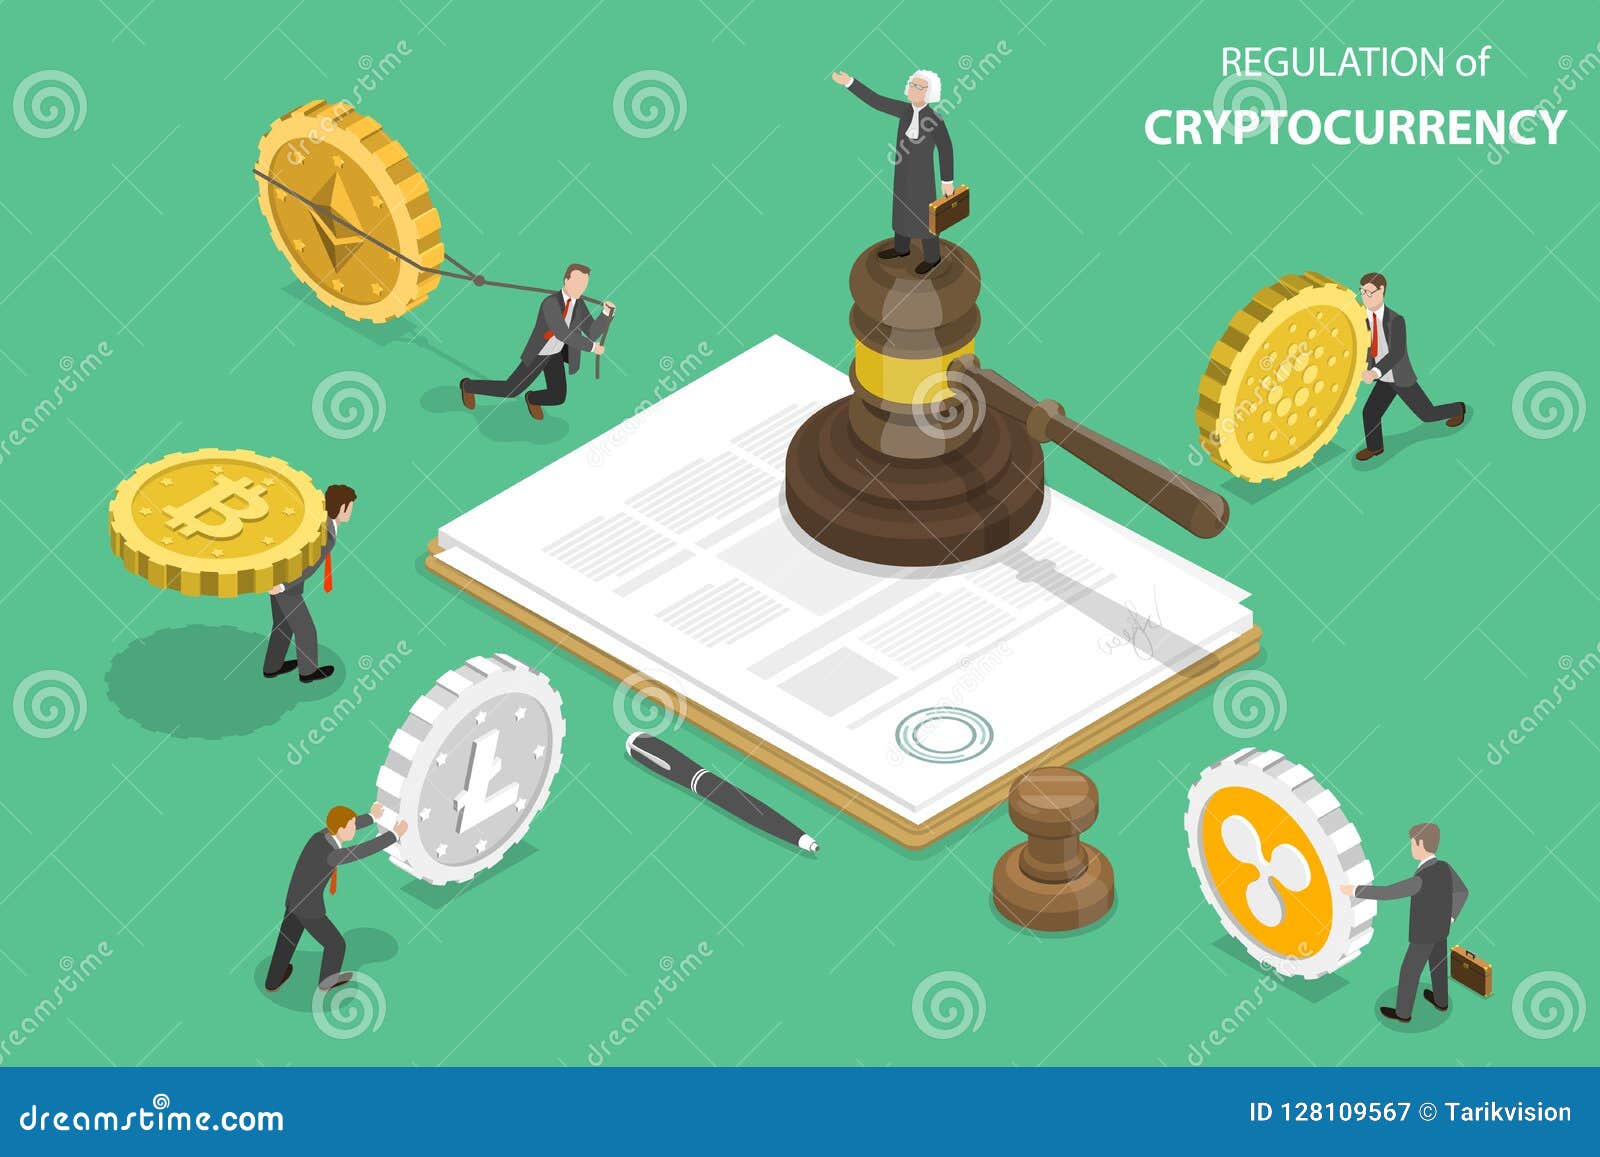 compliance regulation cryptocurrency